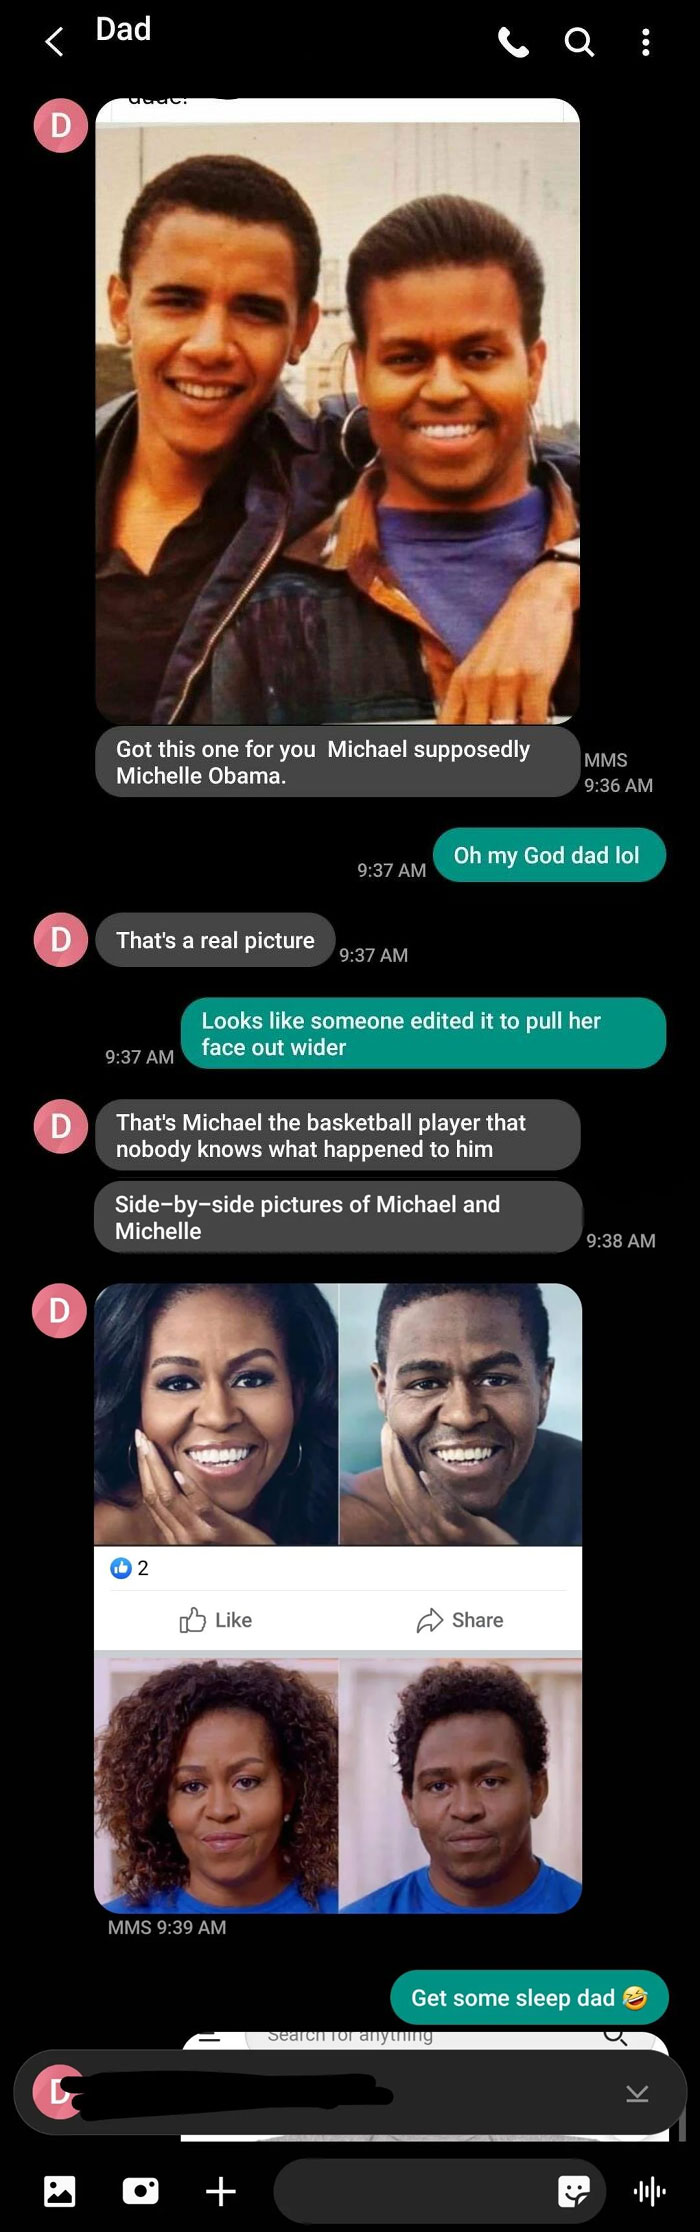 My Dad Has Been Convinced That Michelle Obama Is A Man For Years. I Love Him, But Wow